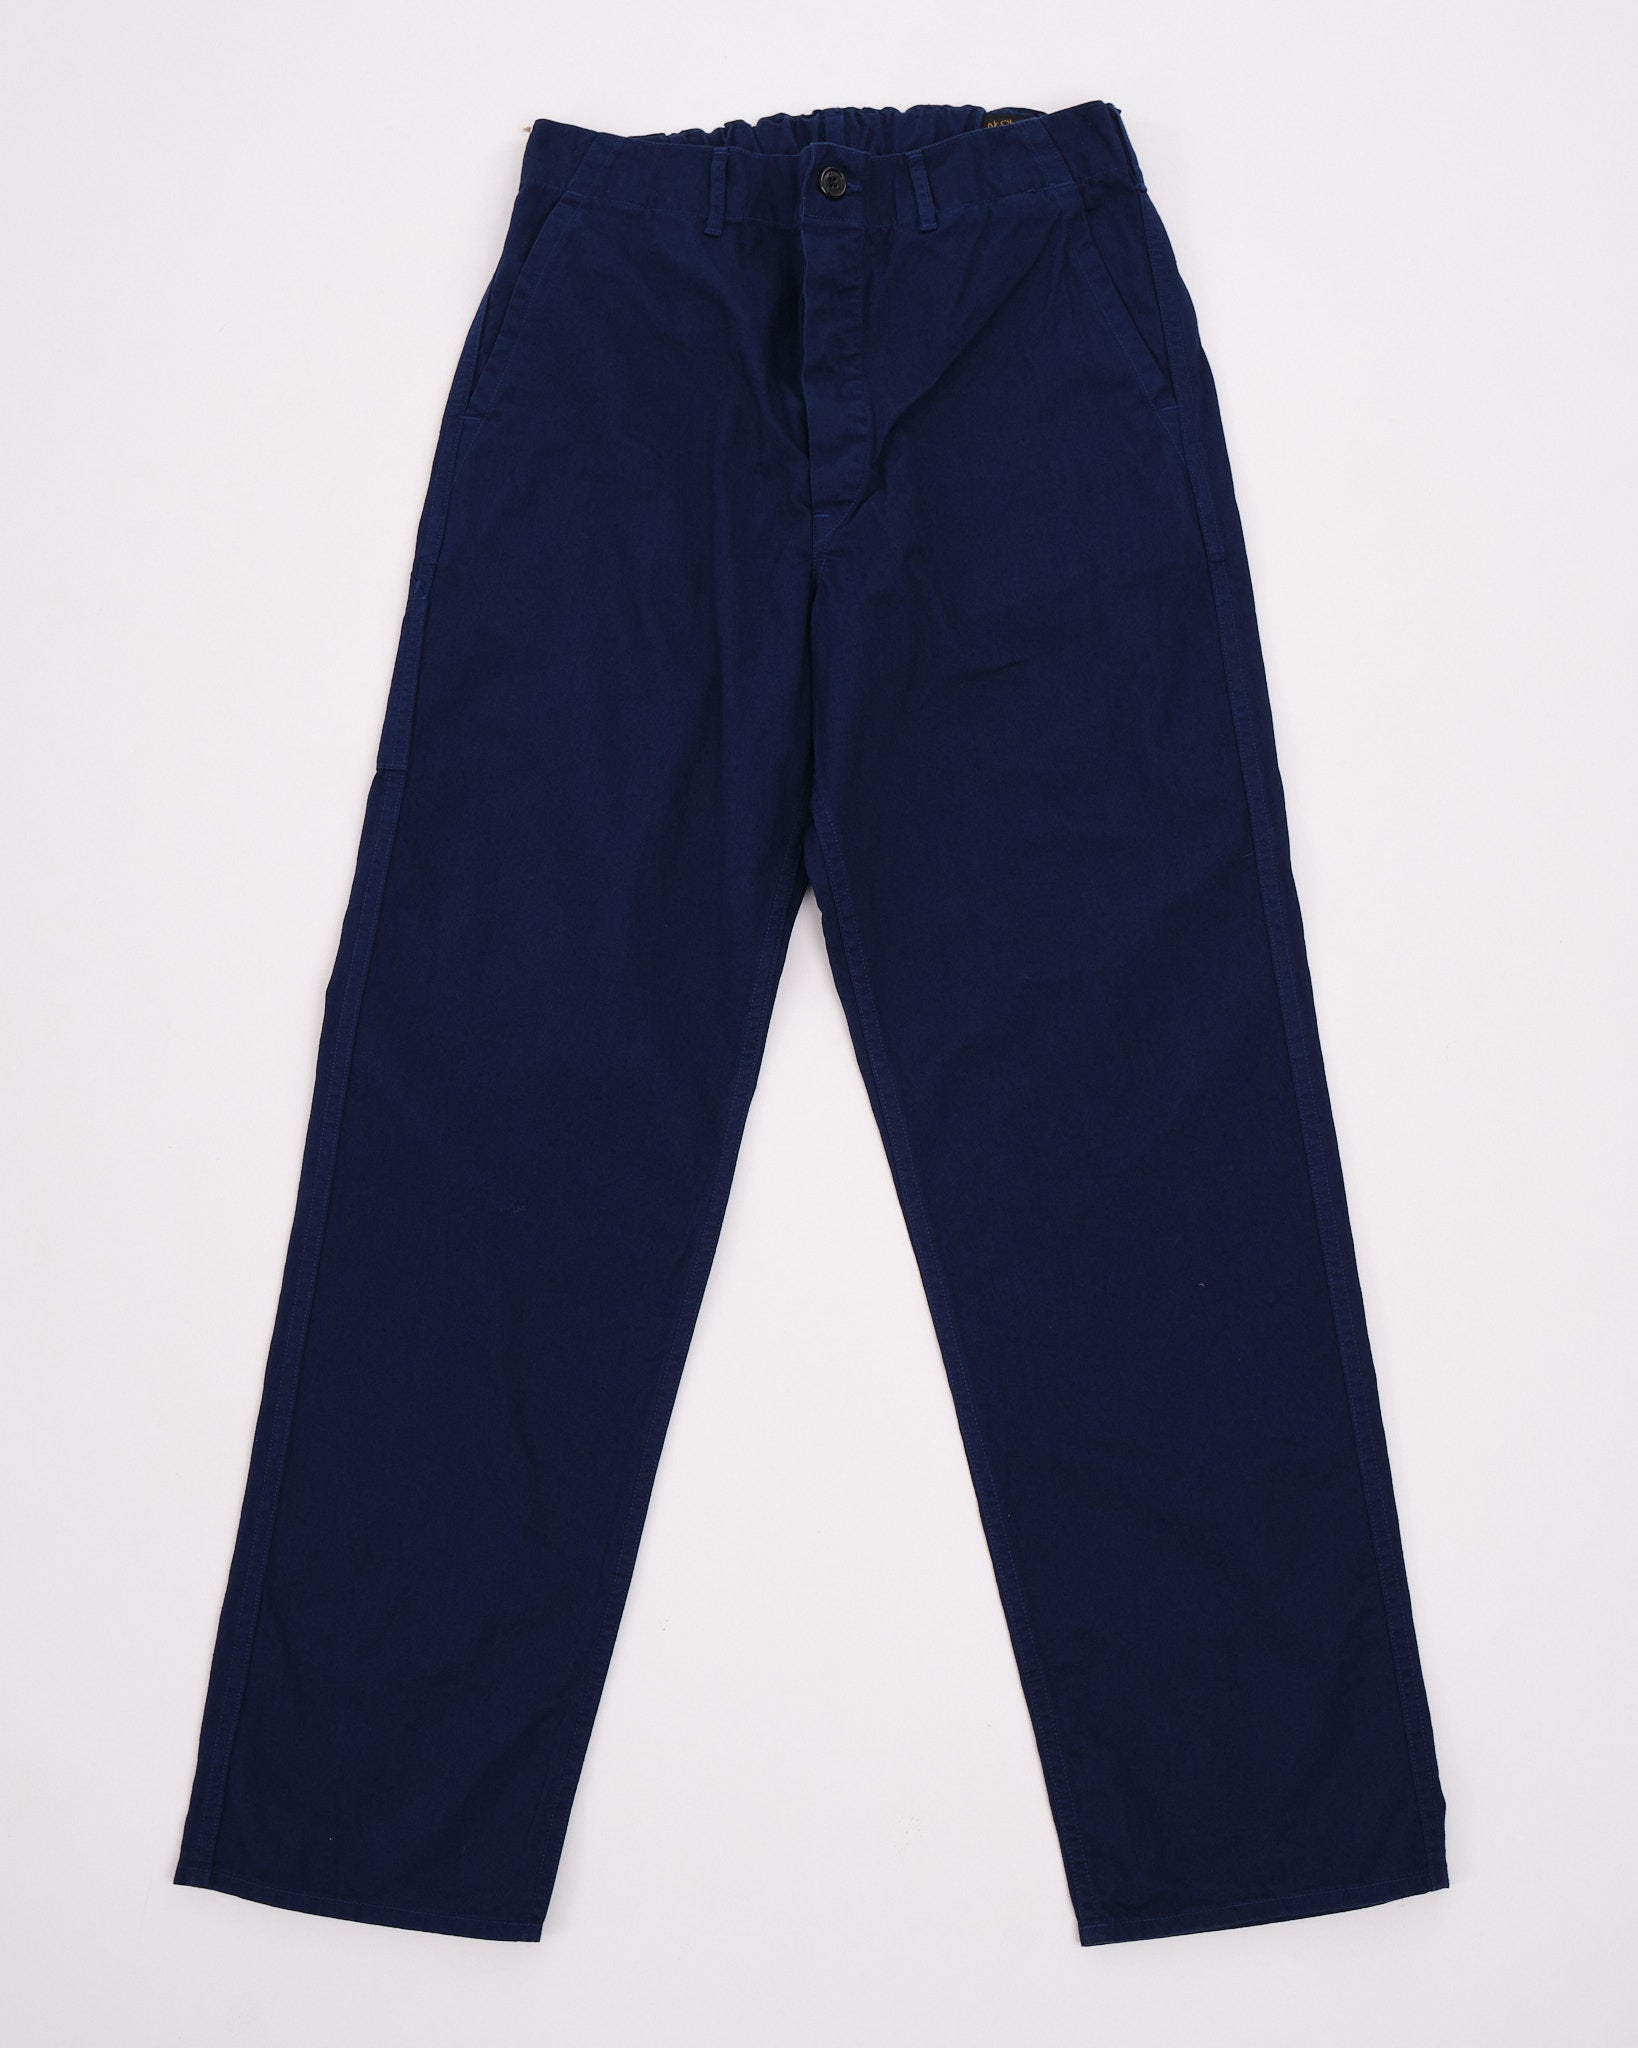 FRENCH WORK PANTS BLUE - Meadow